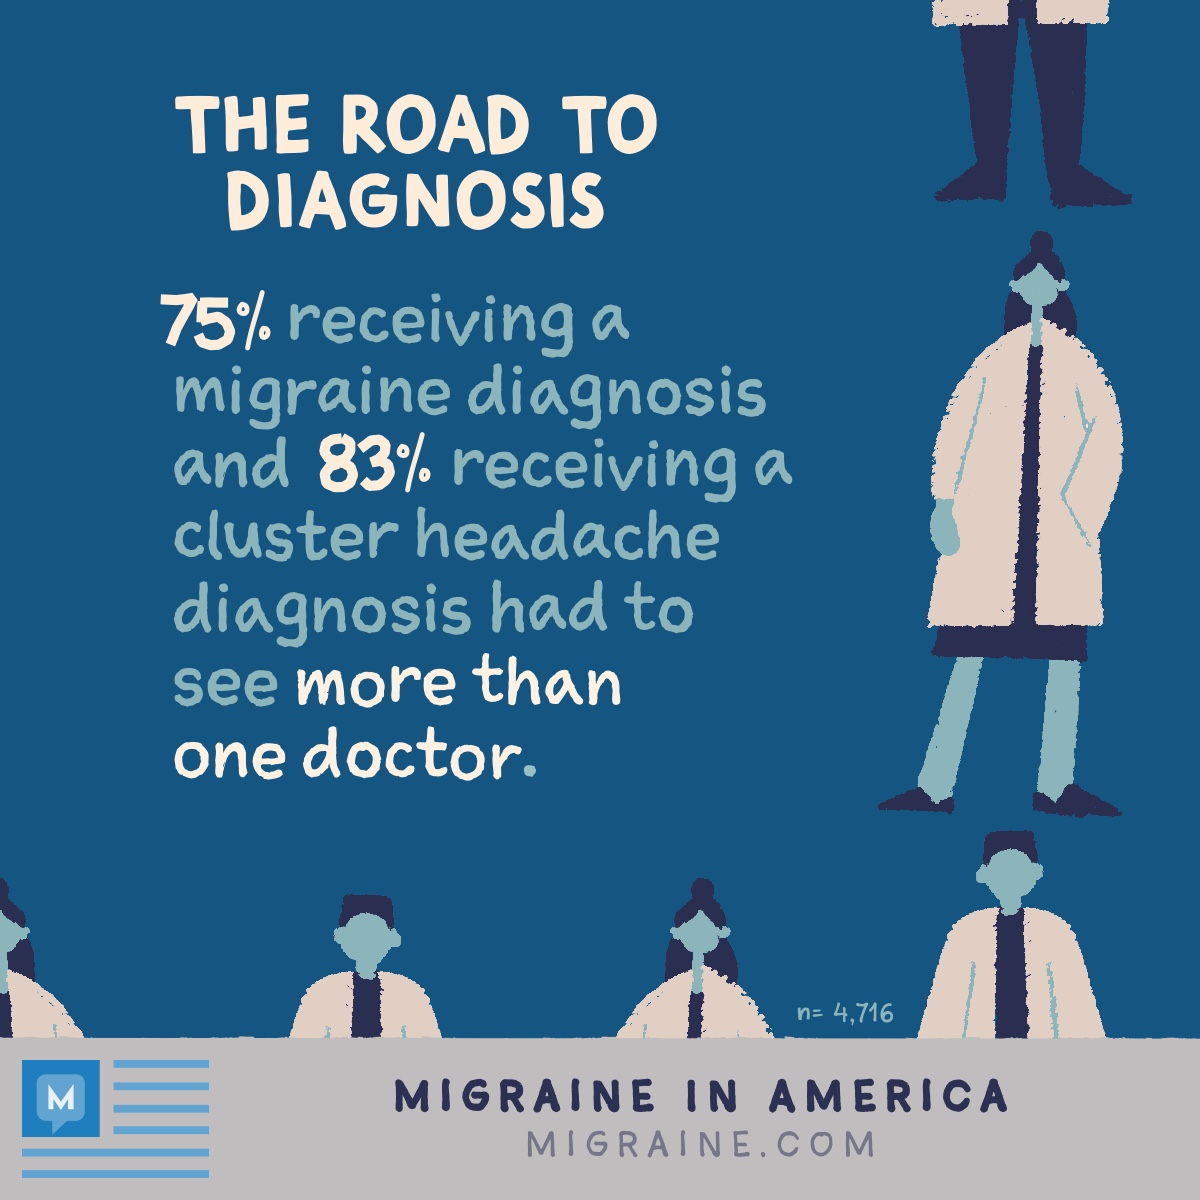 Number of doctors people with cluster and migraine had to see before receiving an accurate diagnosis